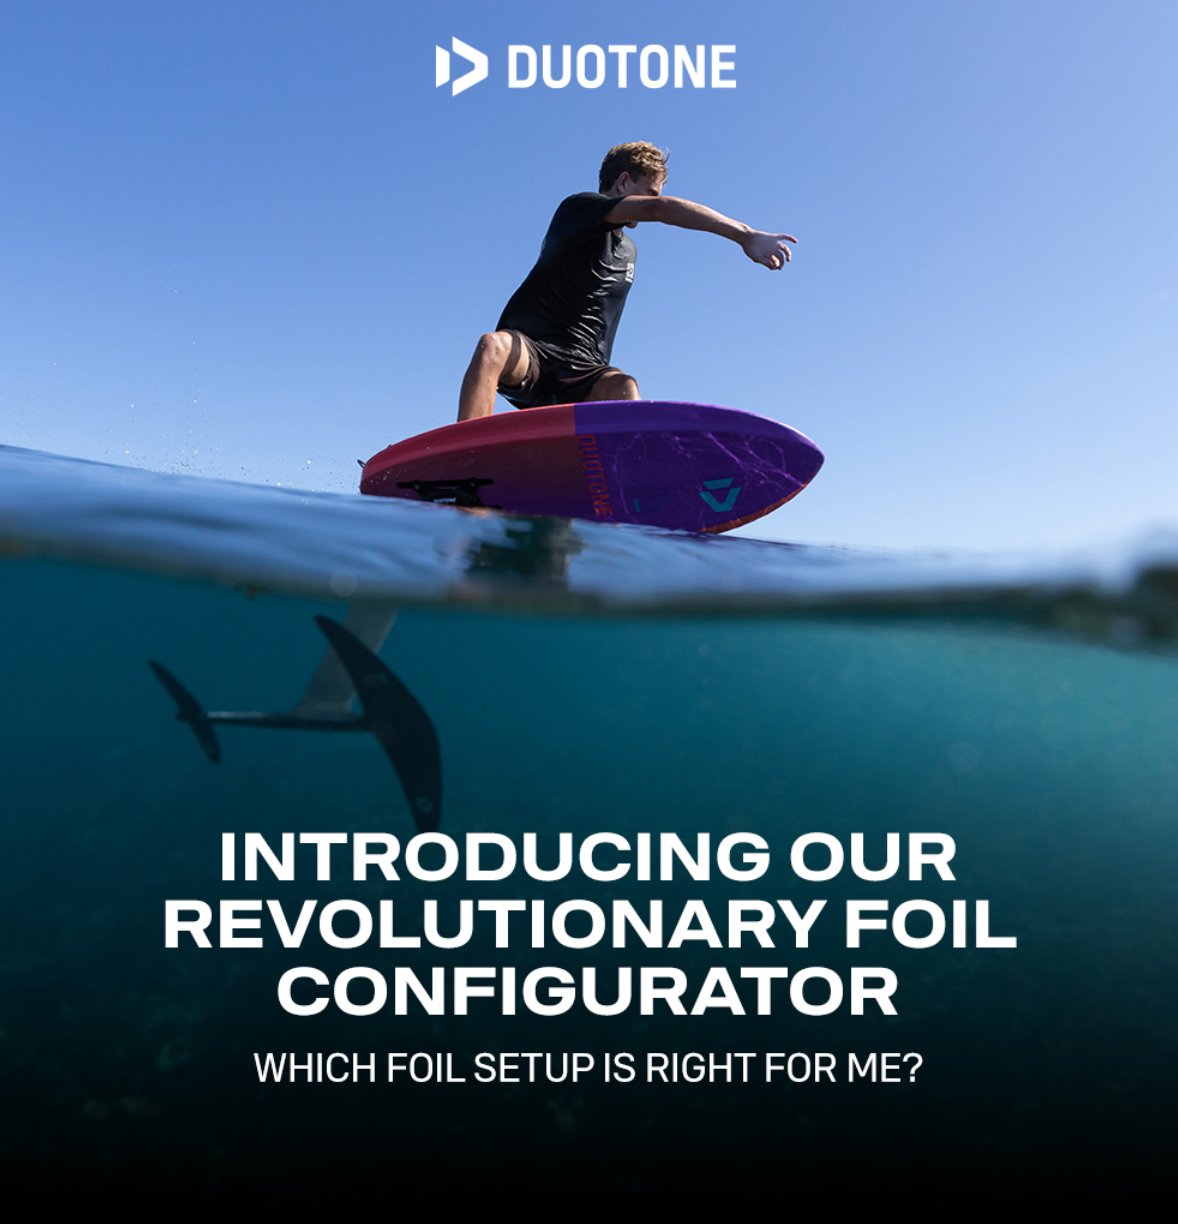 Duotone Foiling - Introducing Our Revolutionary Foil Configurator 💯 - Worthing Watersports